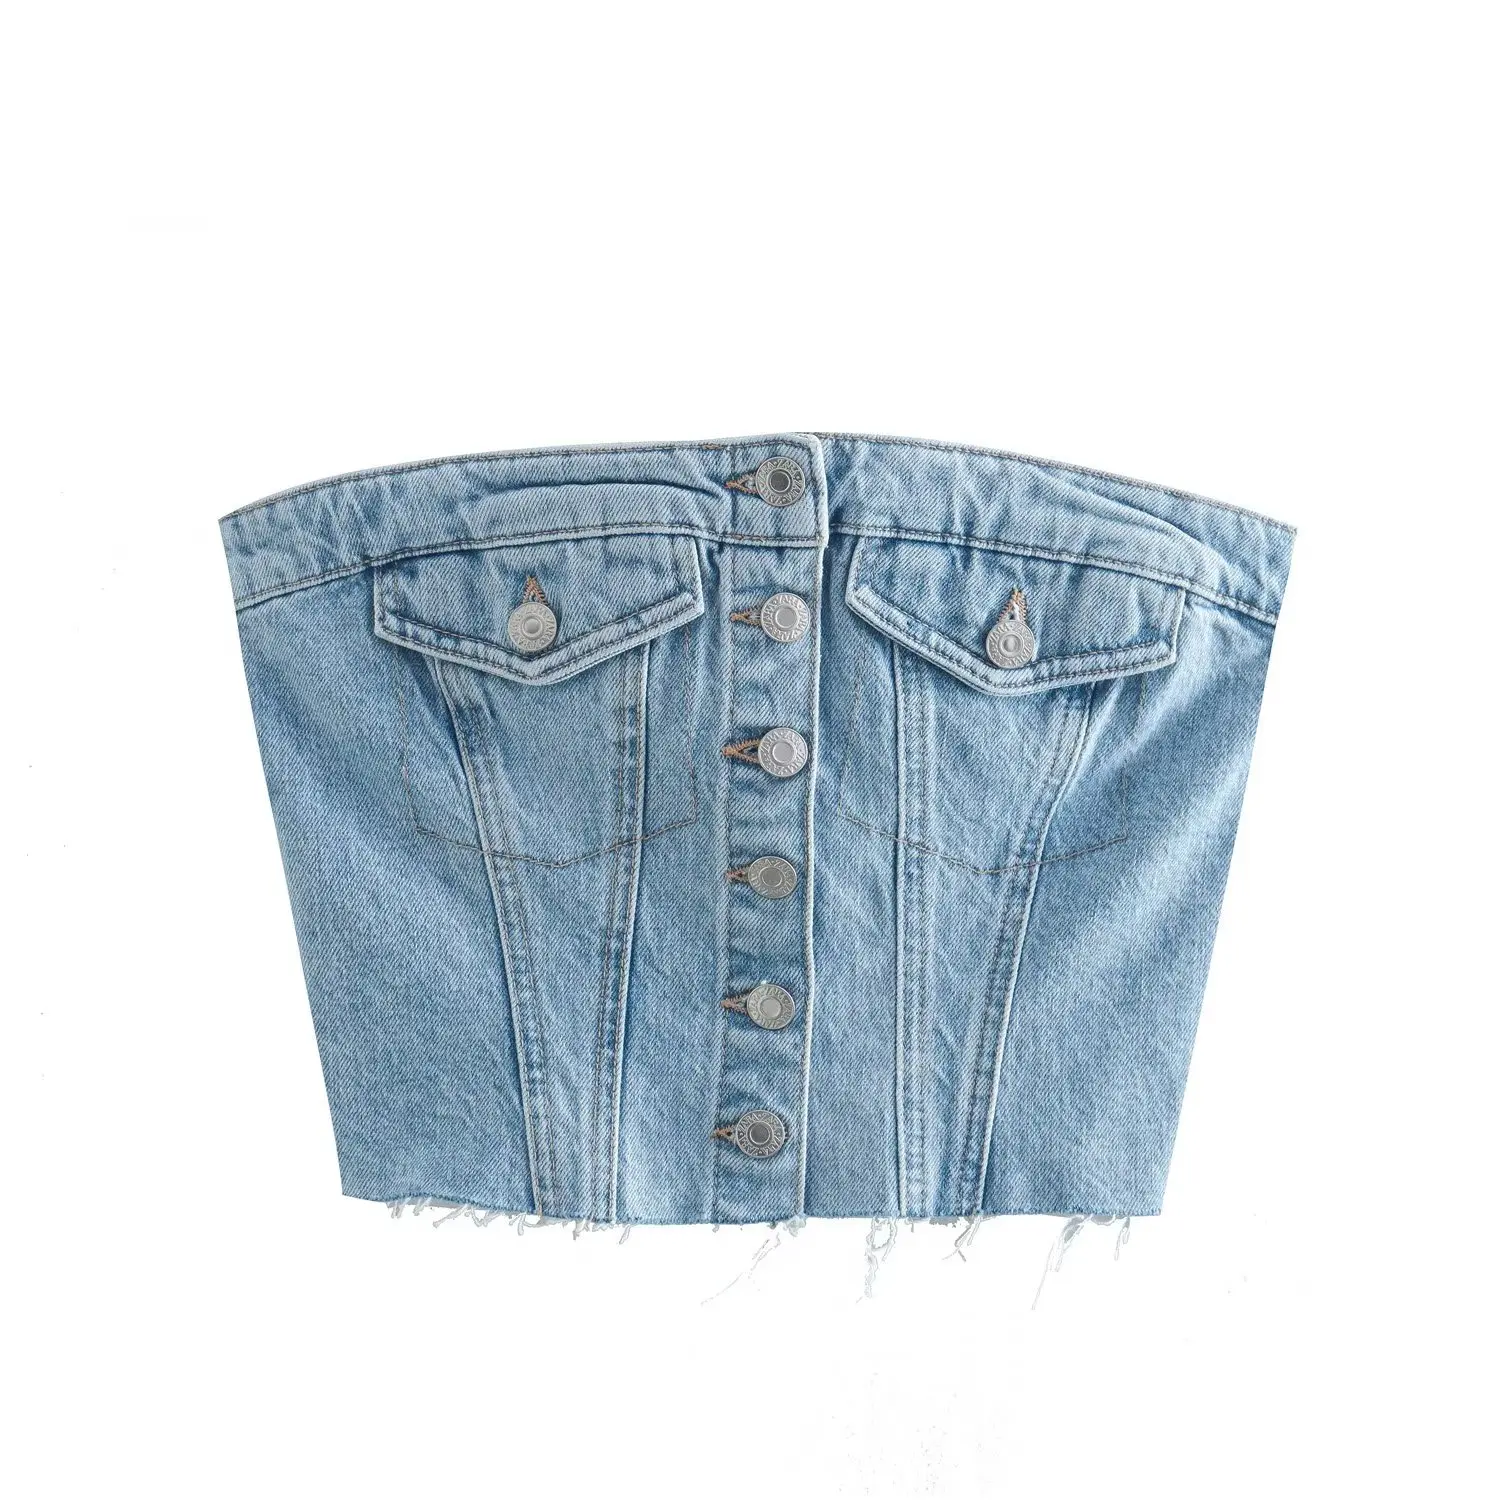 

PB&ZA summer new women's fashion trend all-match tube top flap pockets decorated with denim corset-style cropped top 6739/200